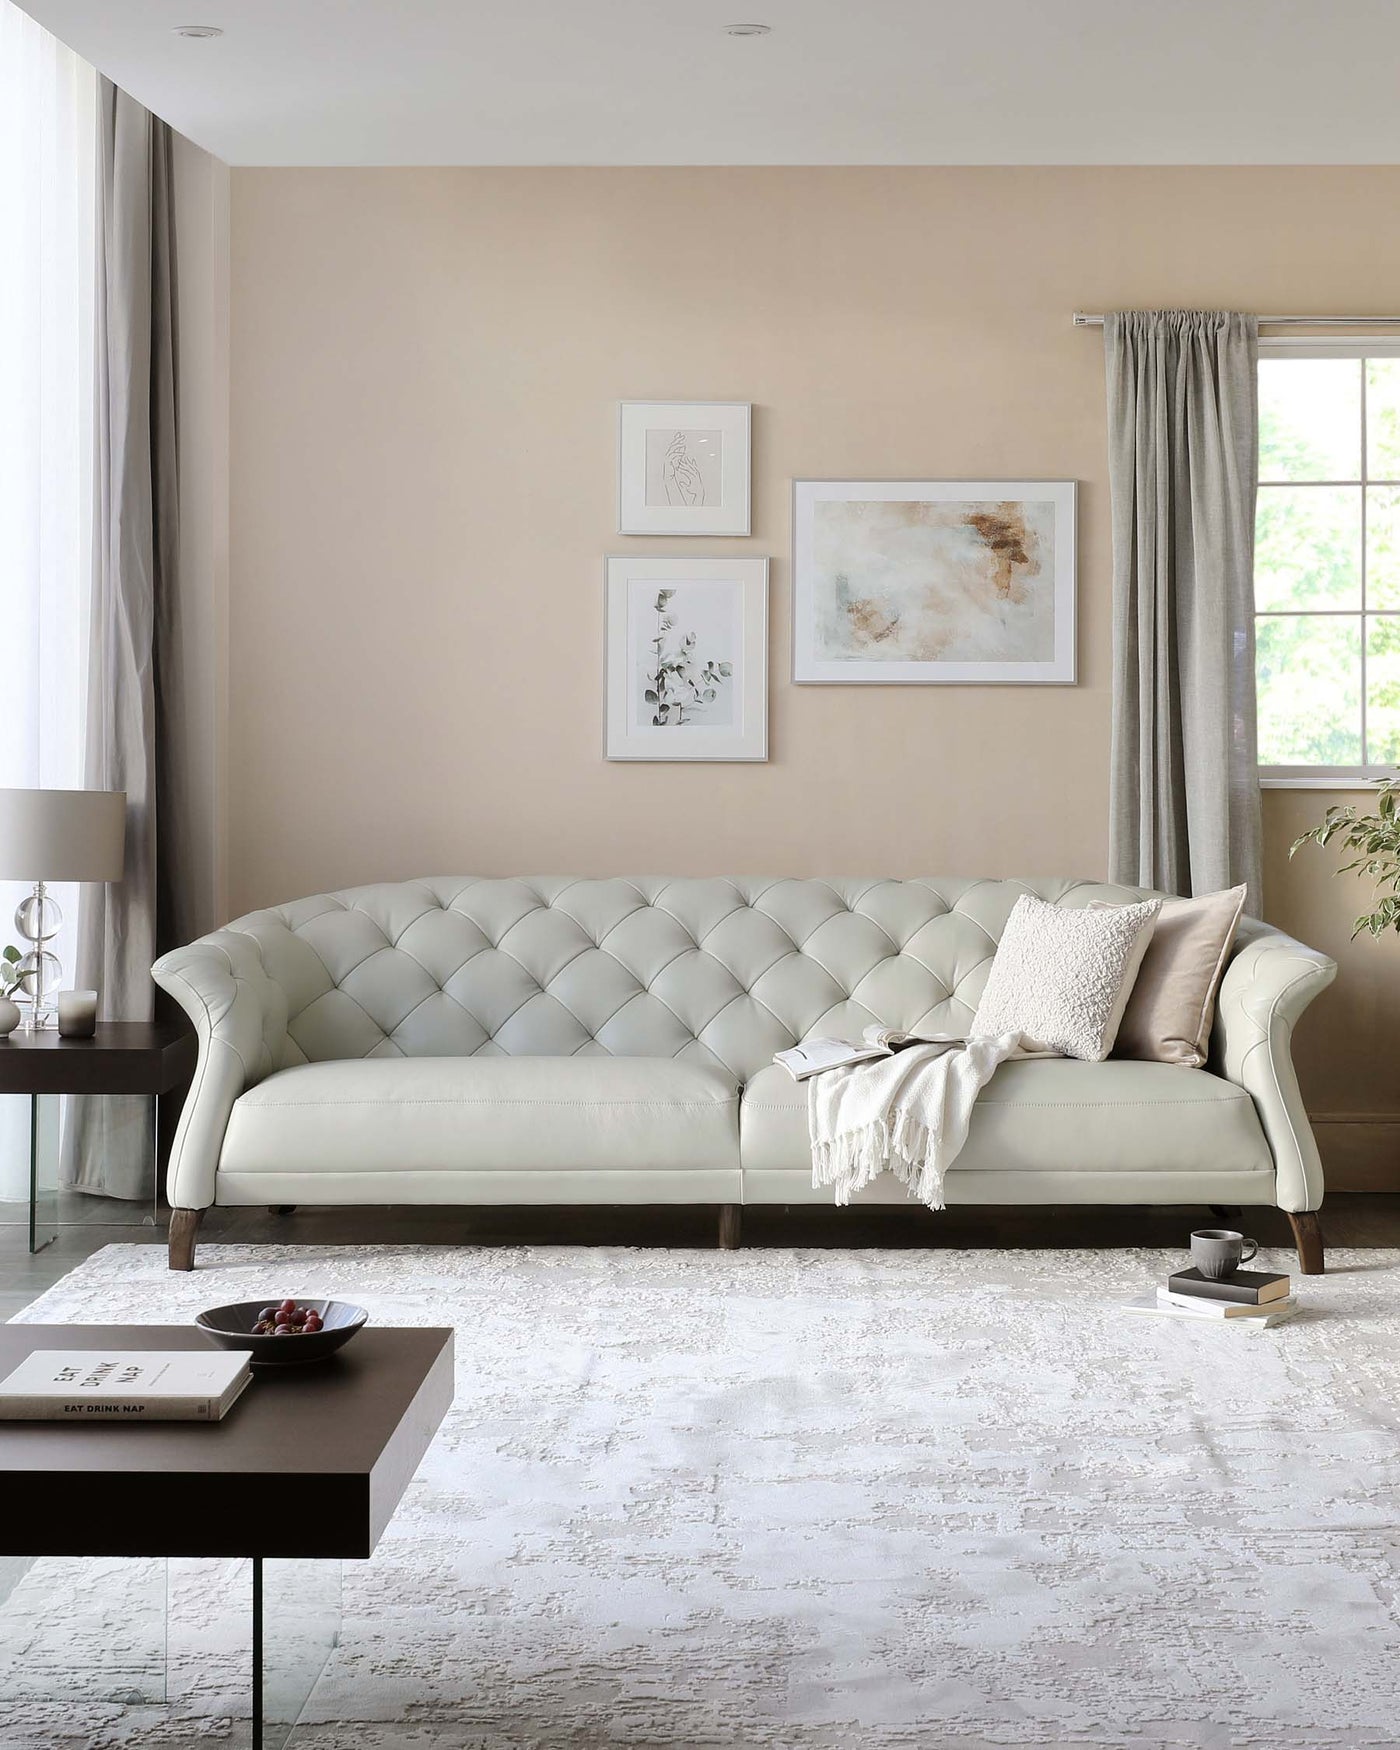 Elegant tufted back pale green sofa with graceful curved arms, complemented by a dark wood side table and a minimalist dark coffee table with a book and cup.